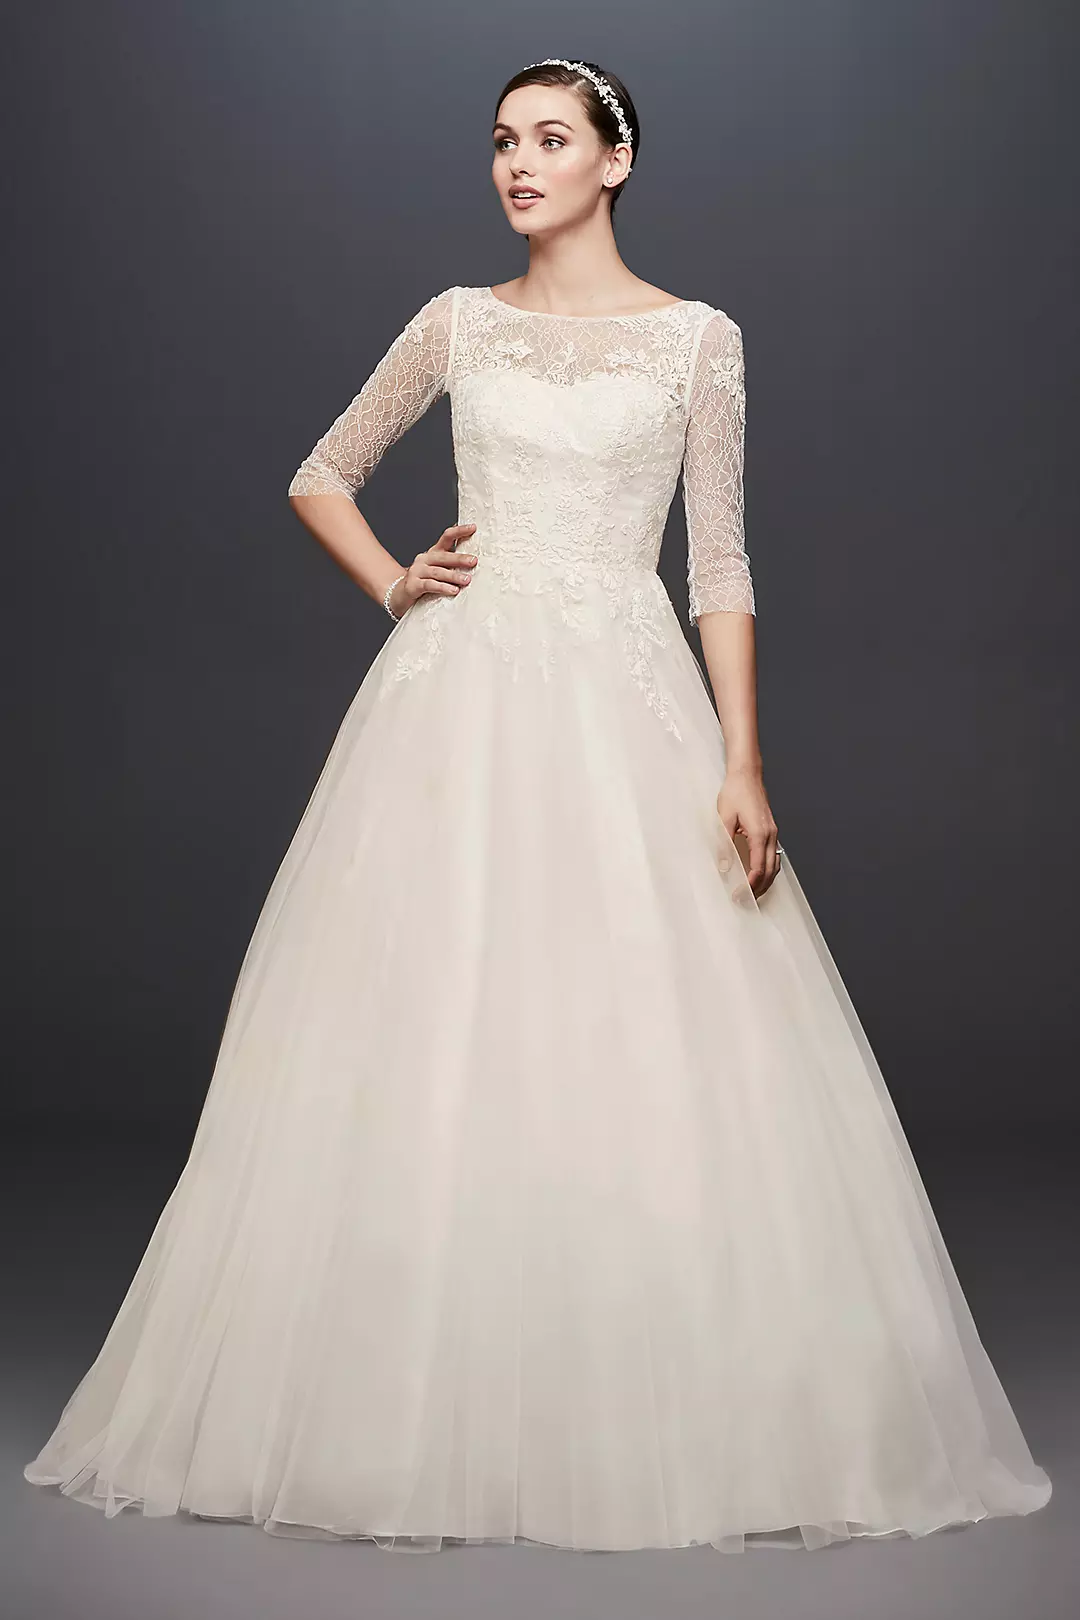 3/4 Sleeve Wedding Dress with Lace and Tulle Skirt Image